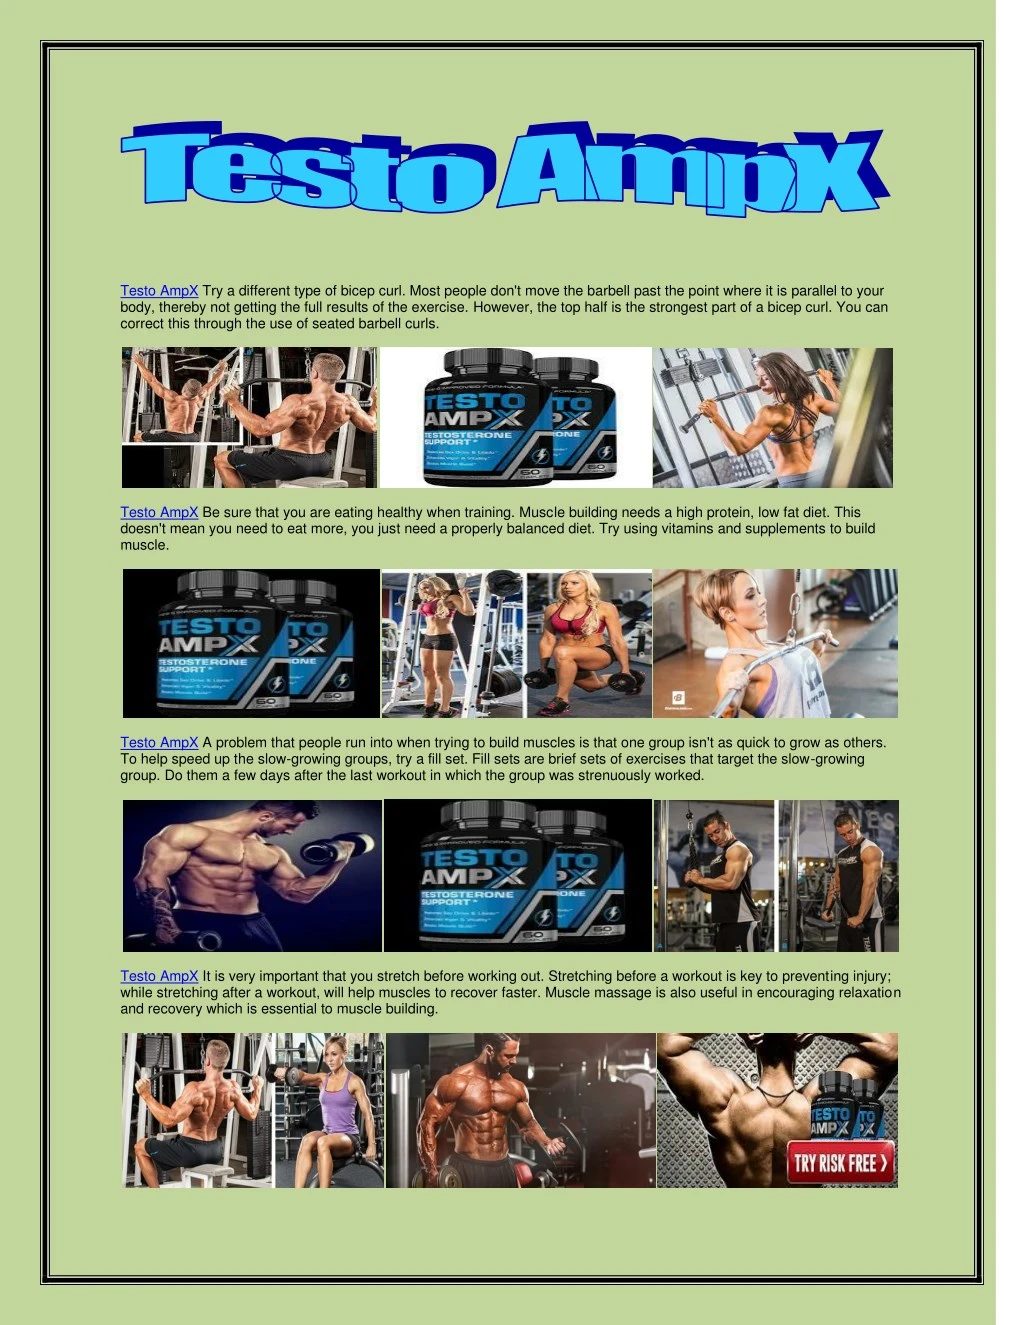 testo ampx try a different type of bicep curl